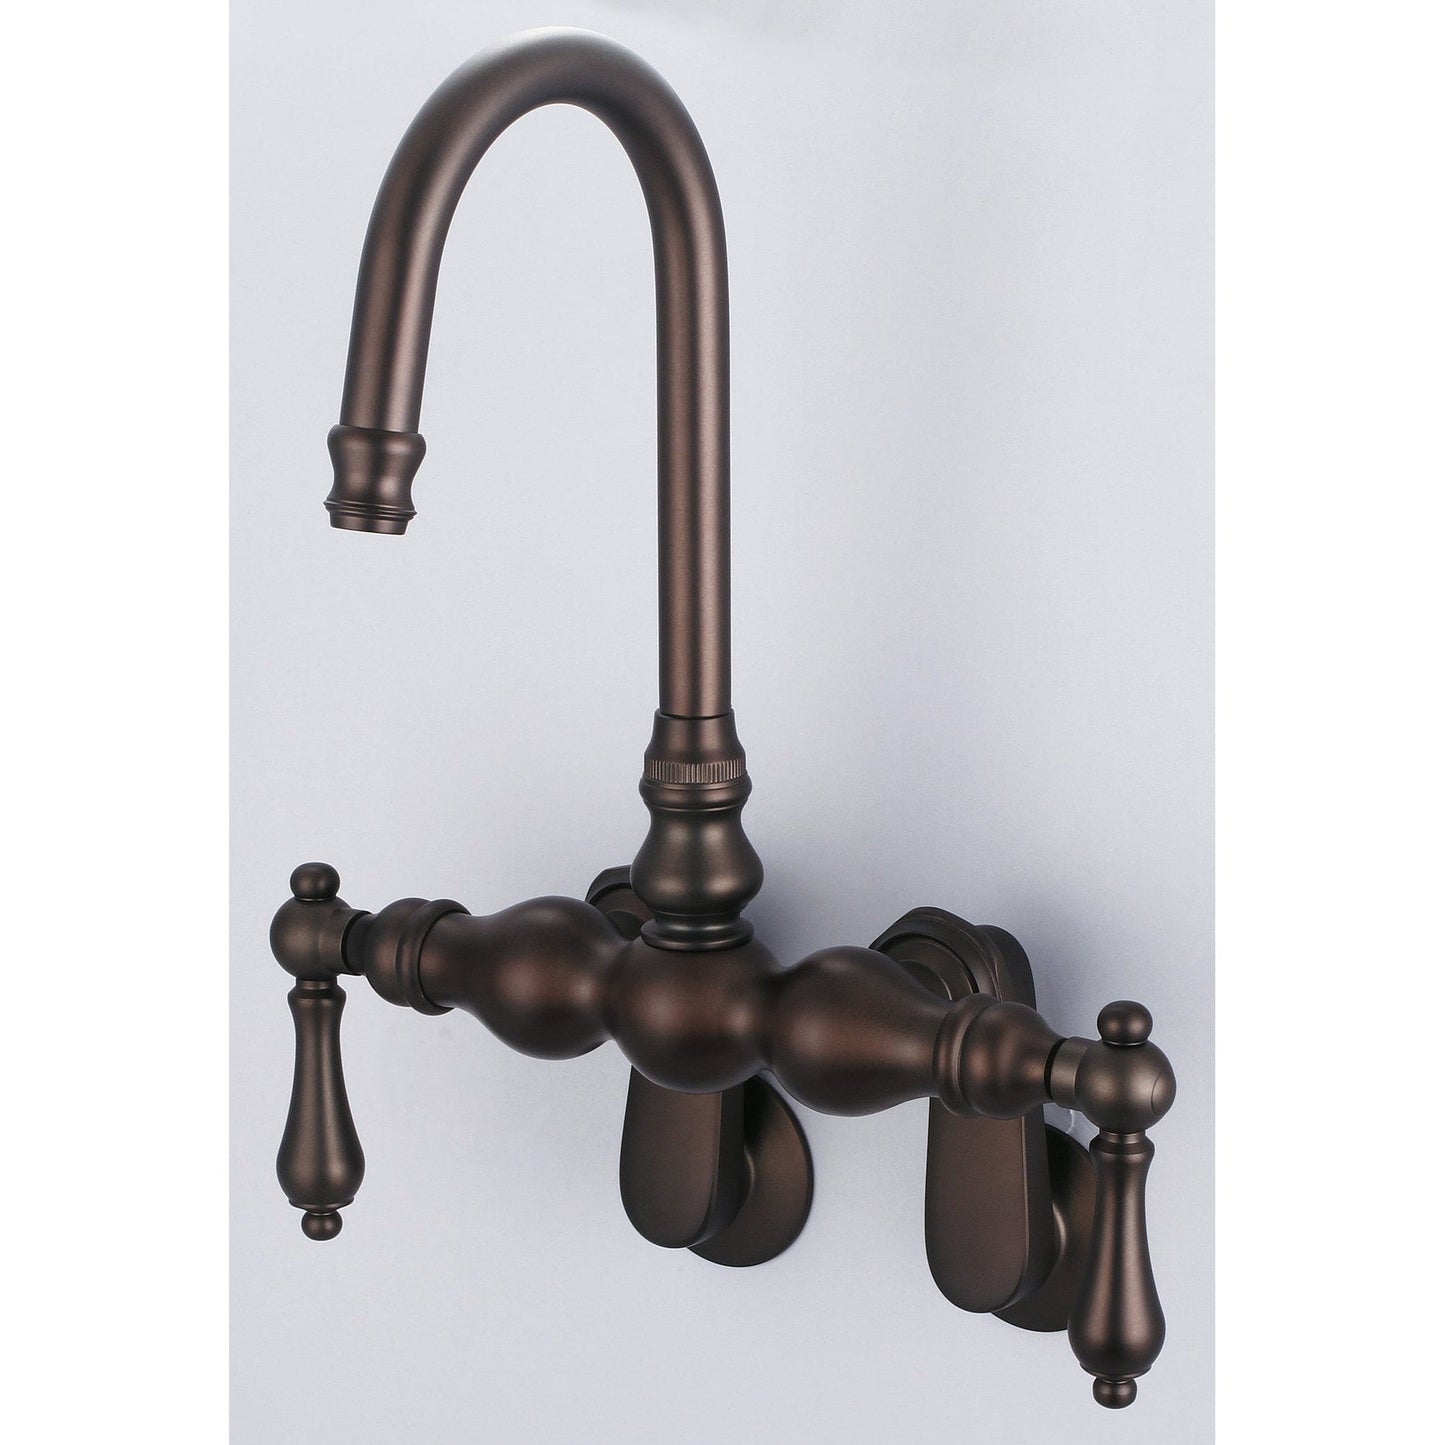 Water Creation Vintage Classic Adjustable Spread Wall Mount Tub F6-0015 9.25" Brown Solid Brass Faucet With Gooseneck Spout And Swivel Wall Connector And Metal Lever Handles Without Labels